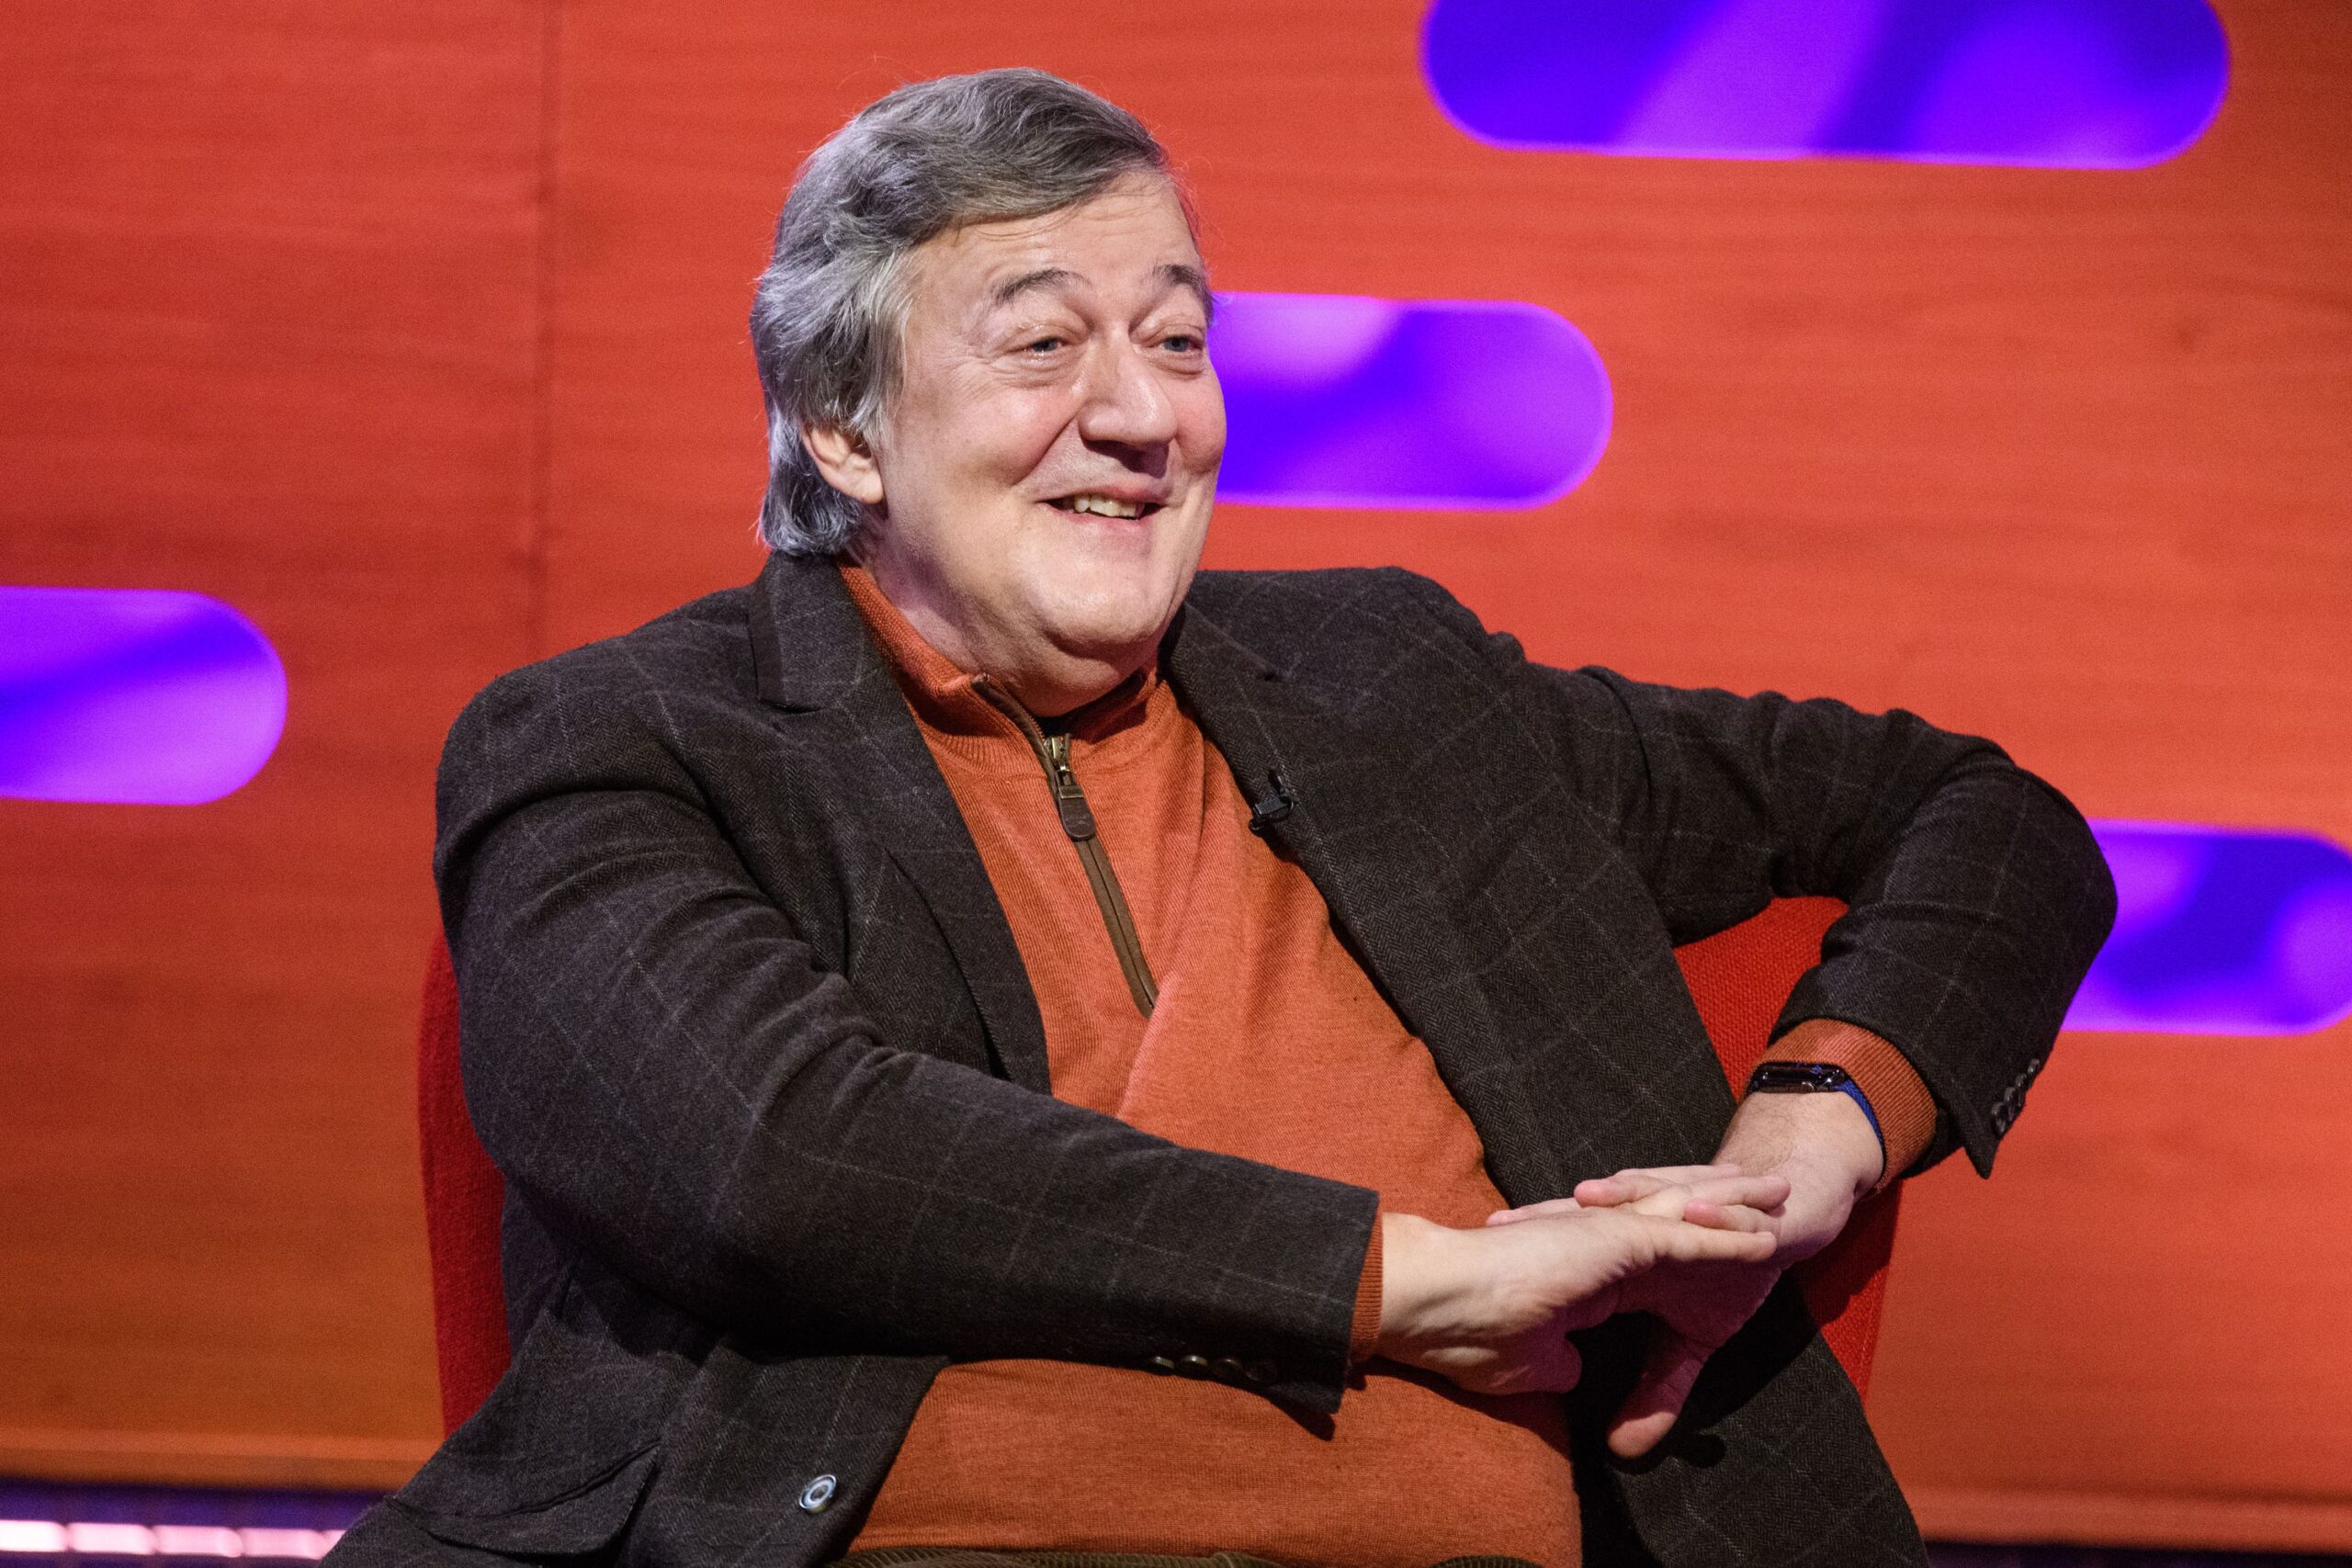 Stephen fry nhs campaign scaled